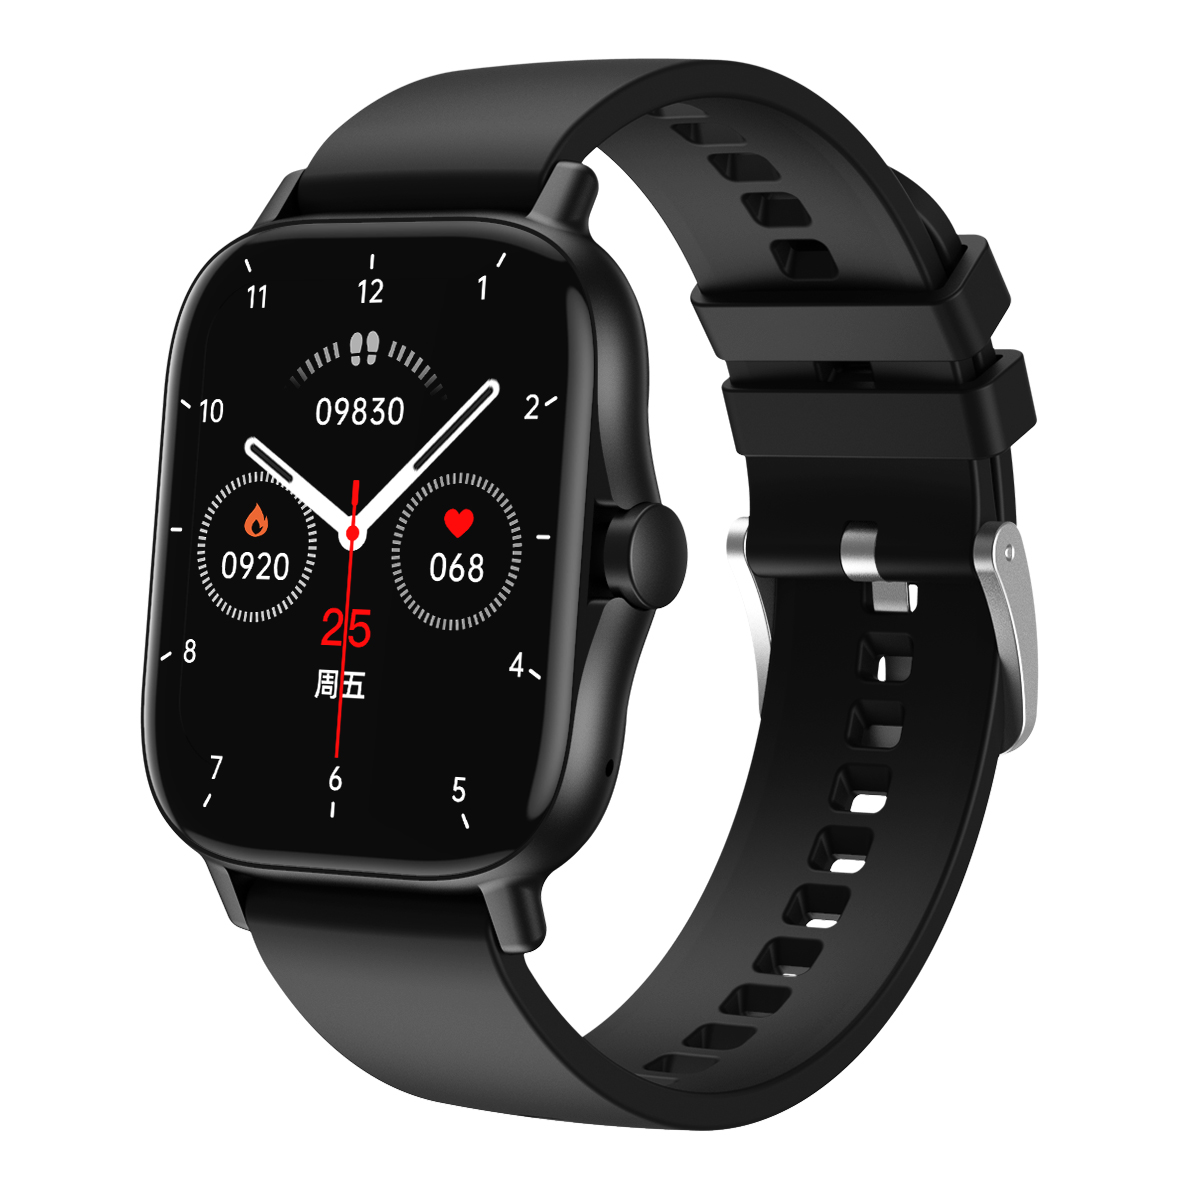 IP67 Waterproof Precise Heart Rate Monitoring Smart Watch Phone with Voice Call Dw11